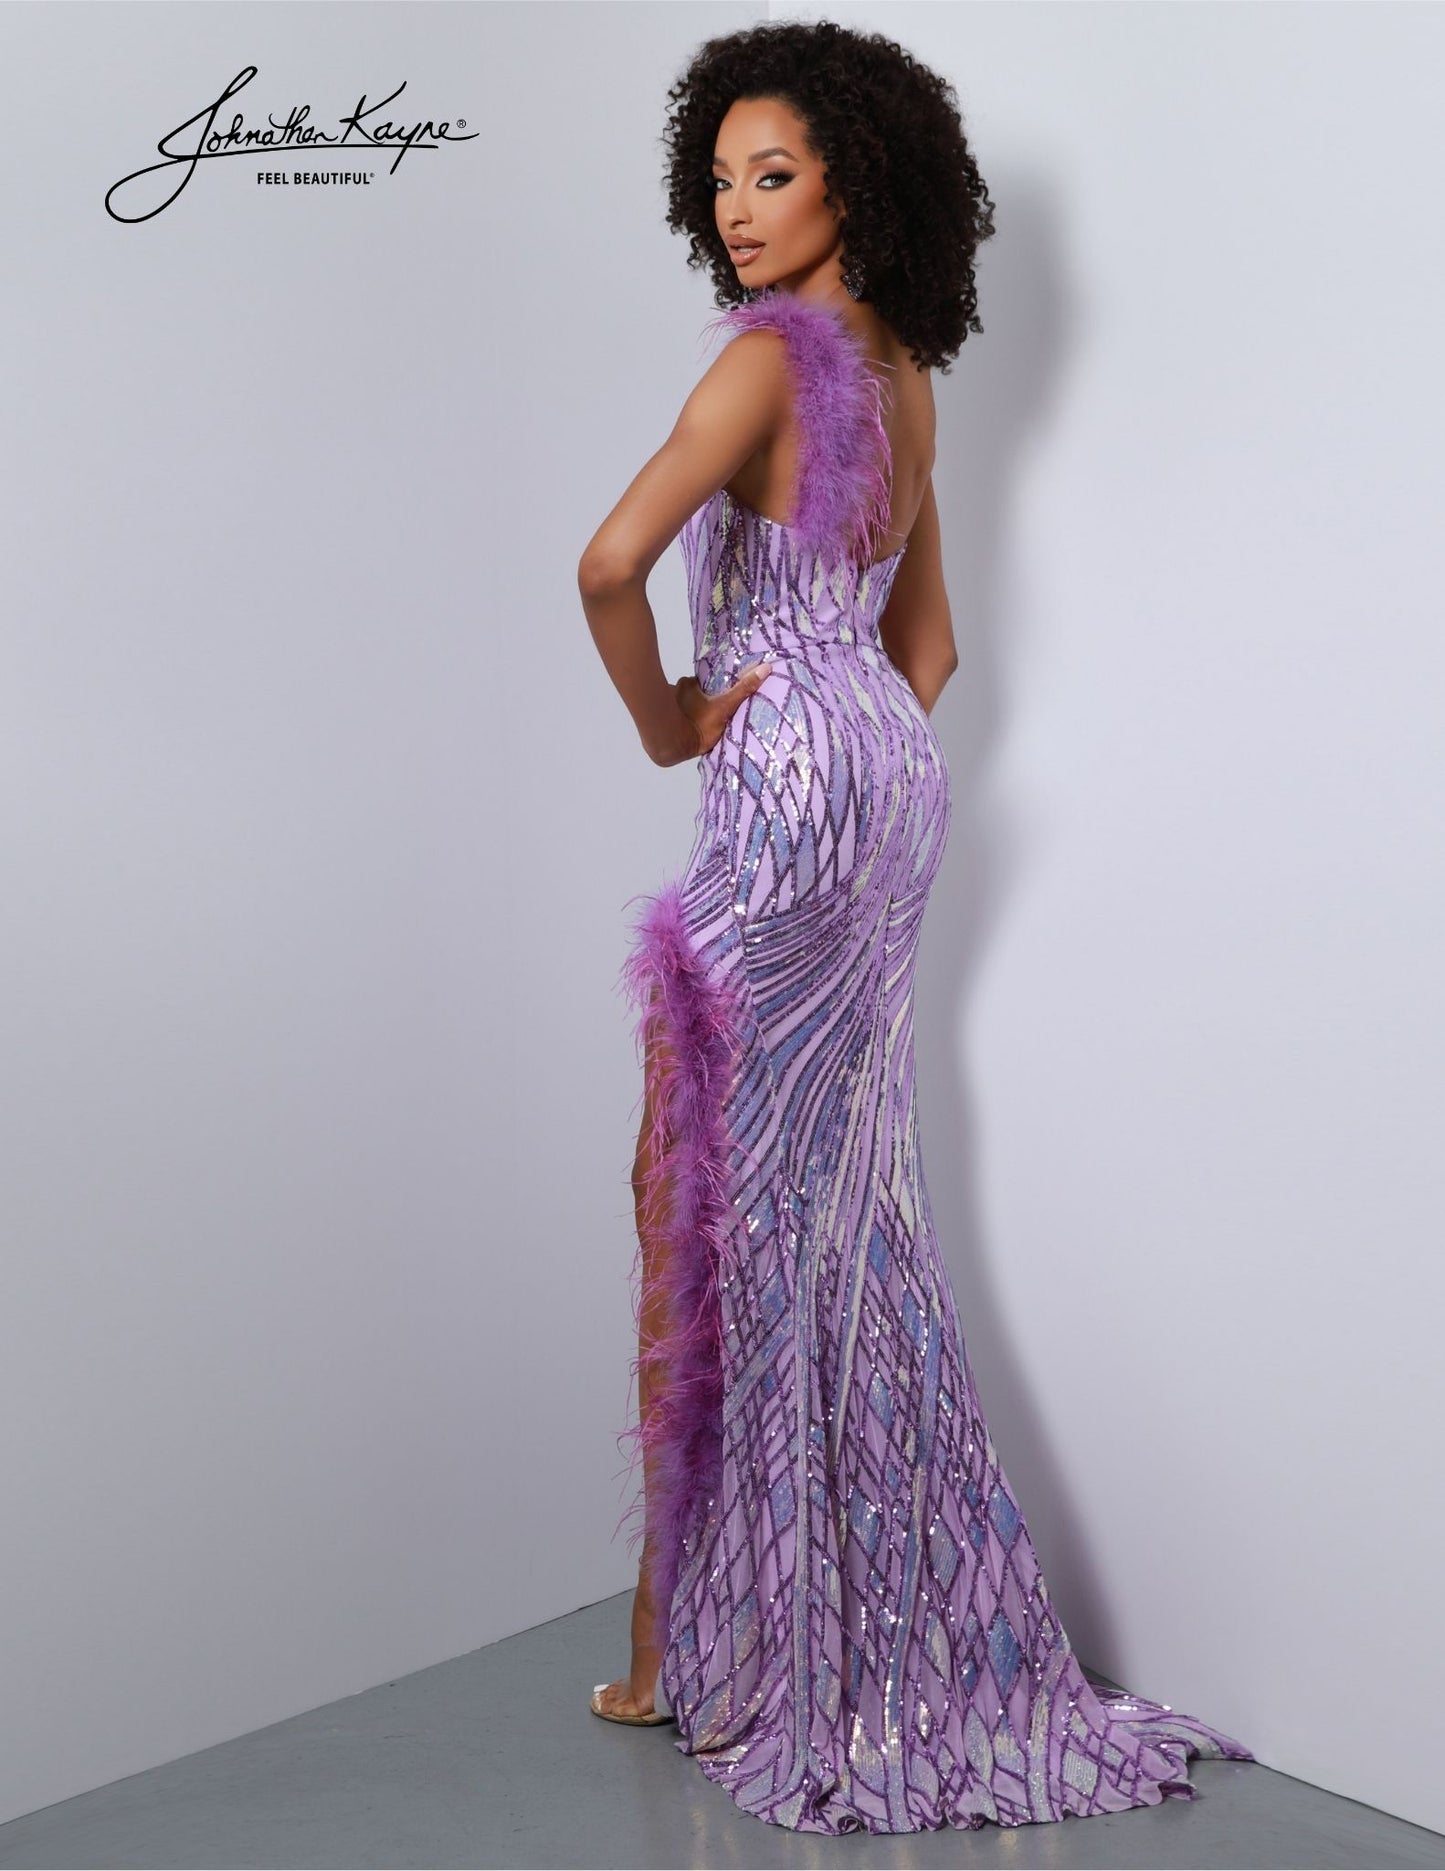 Look stunning in the Johnathan Kayne 2844 Long Prom Dress. This fitted one-shoulder gown features a delicate sequin powermesh, slit details feathers for a striking look. Perfect for an elegant night on the town or any formal occasion. Prepare to steal the show! This one-shoulder wonder is adorned with mesmerizing sequins that shimmer and sparkle, ensuring you radiate elegance and glamour. 